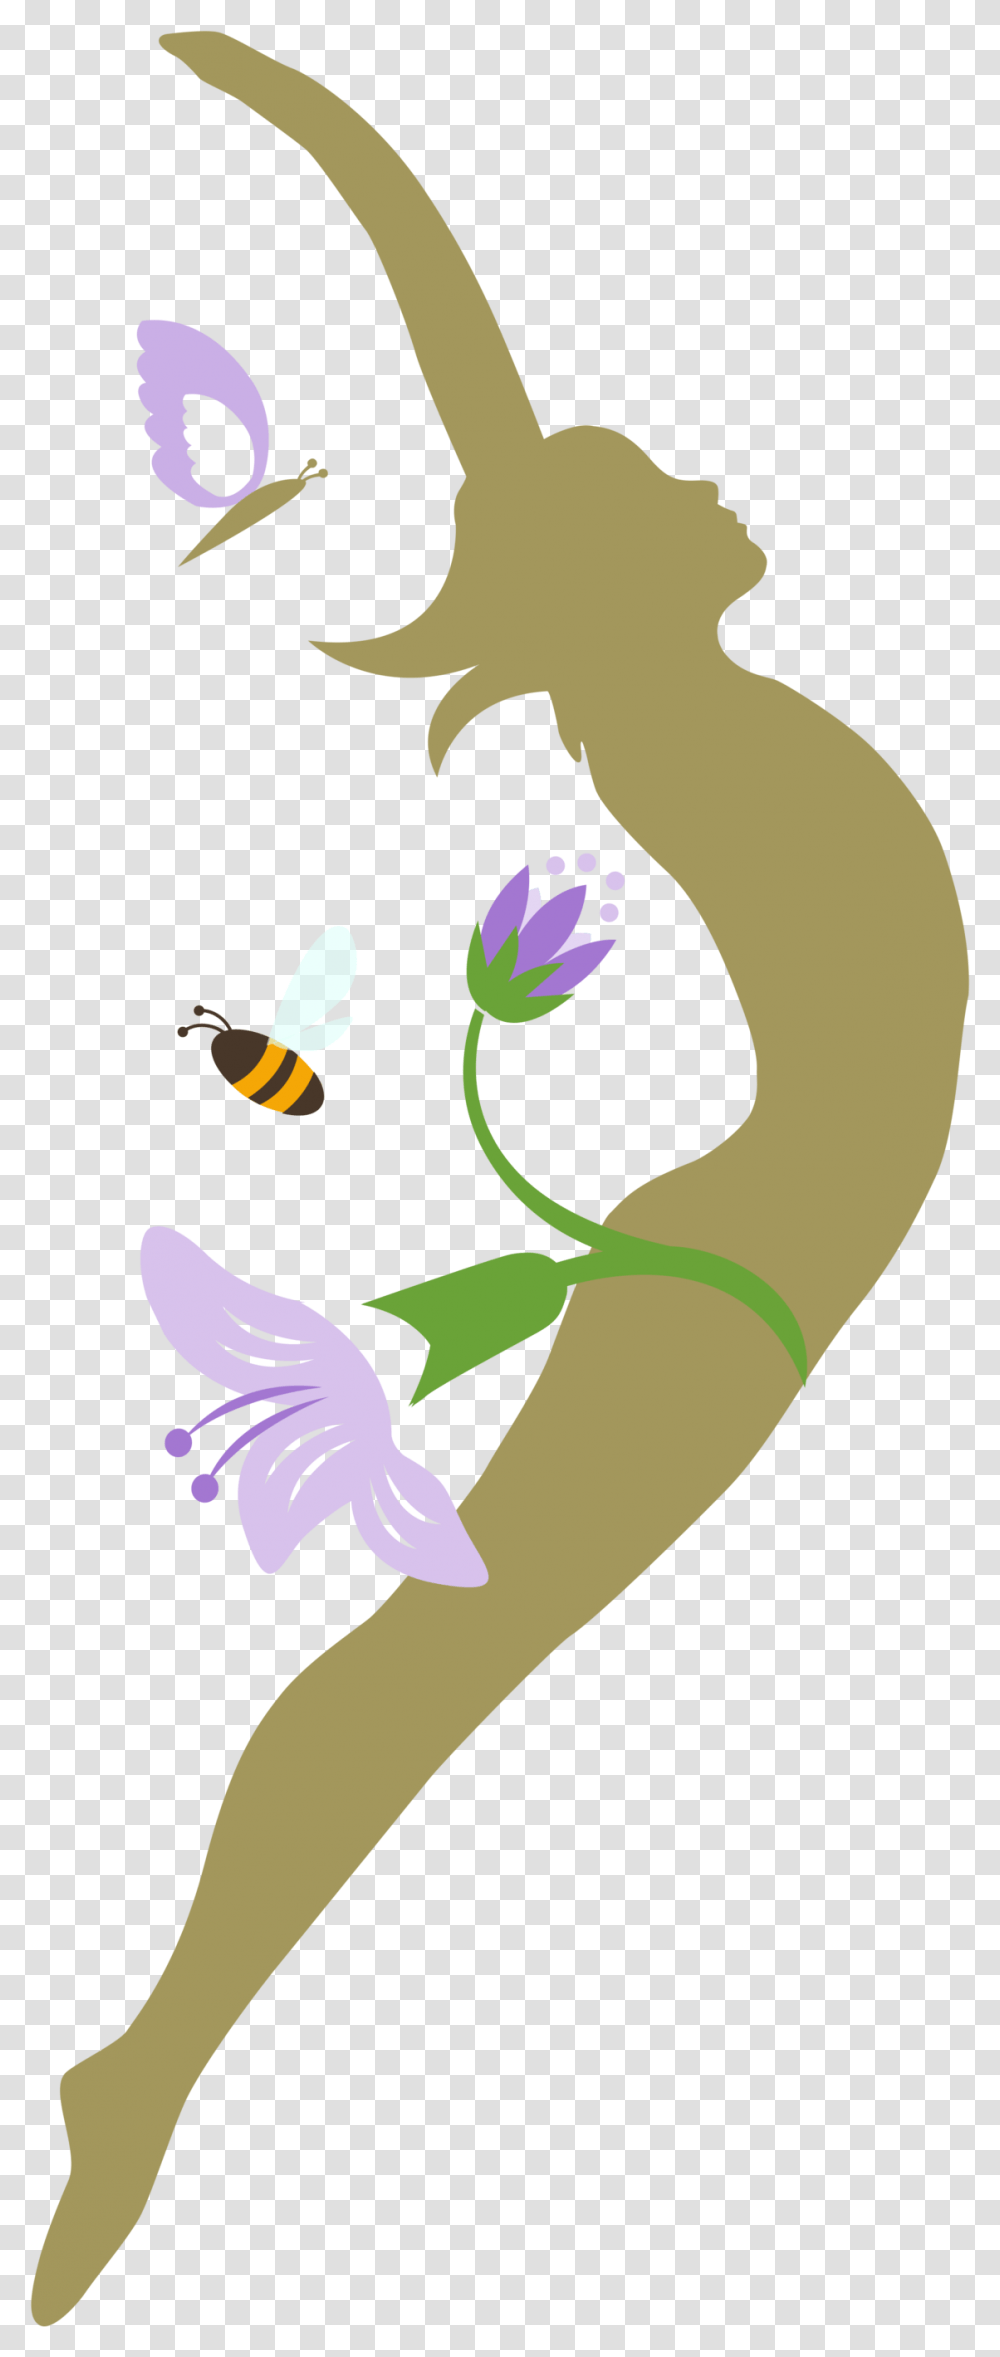 Pukka Pumpkin Spice Latte Mythical Creature, Animal, Invertebrate, Insect, Flower Transparent Png